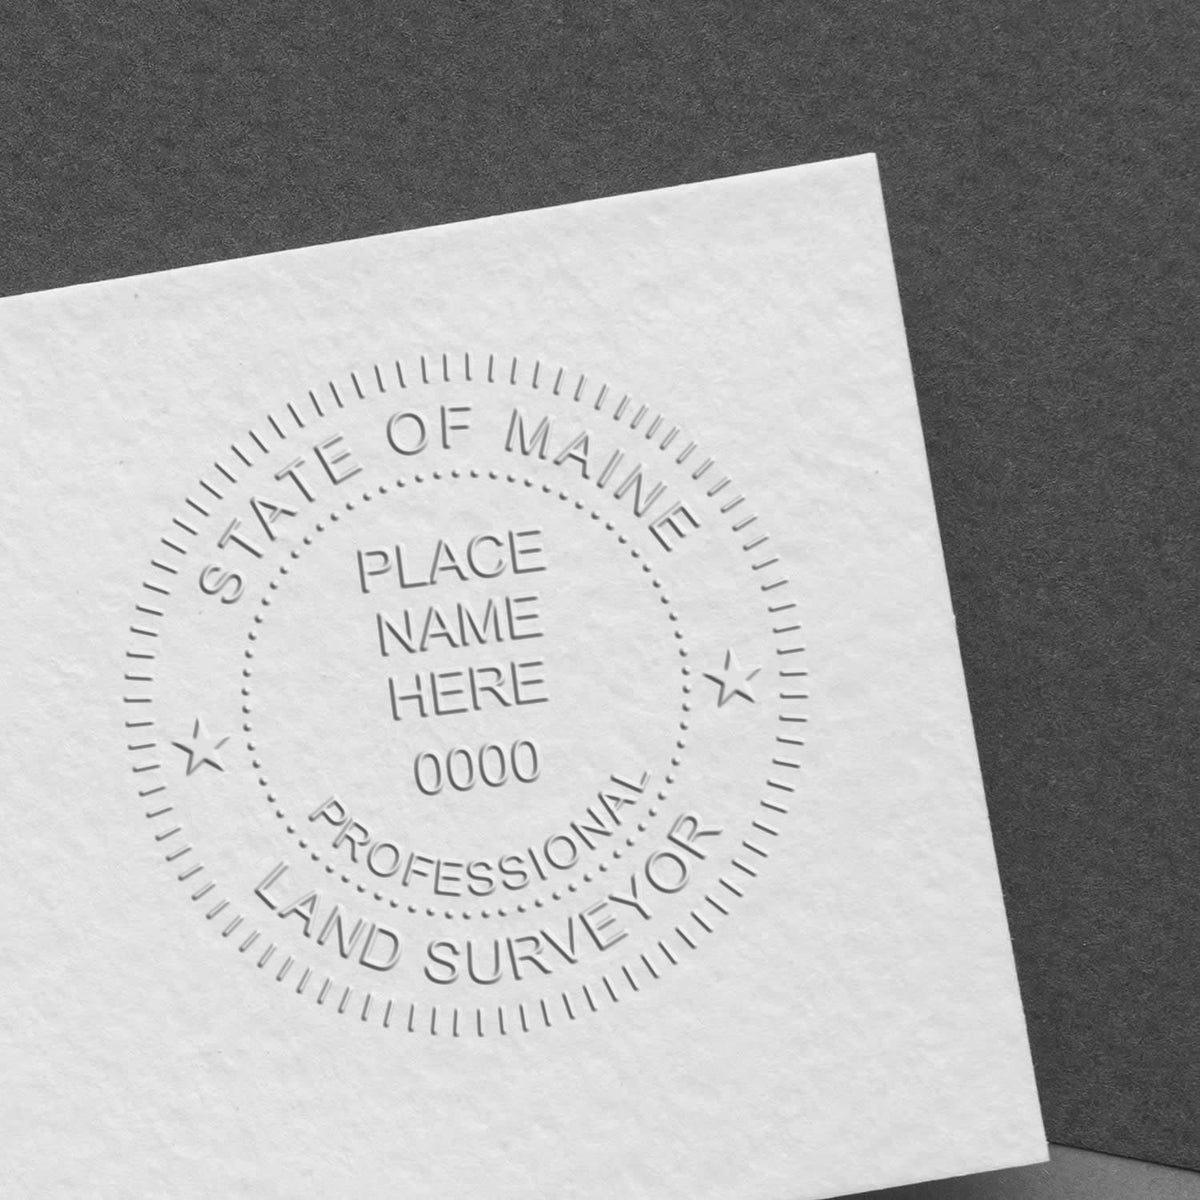 Another Example of a stamped impression of the State of Maine Soft Land Surveyor Embossing Seal on a piece of office paper.